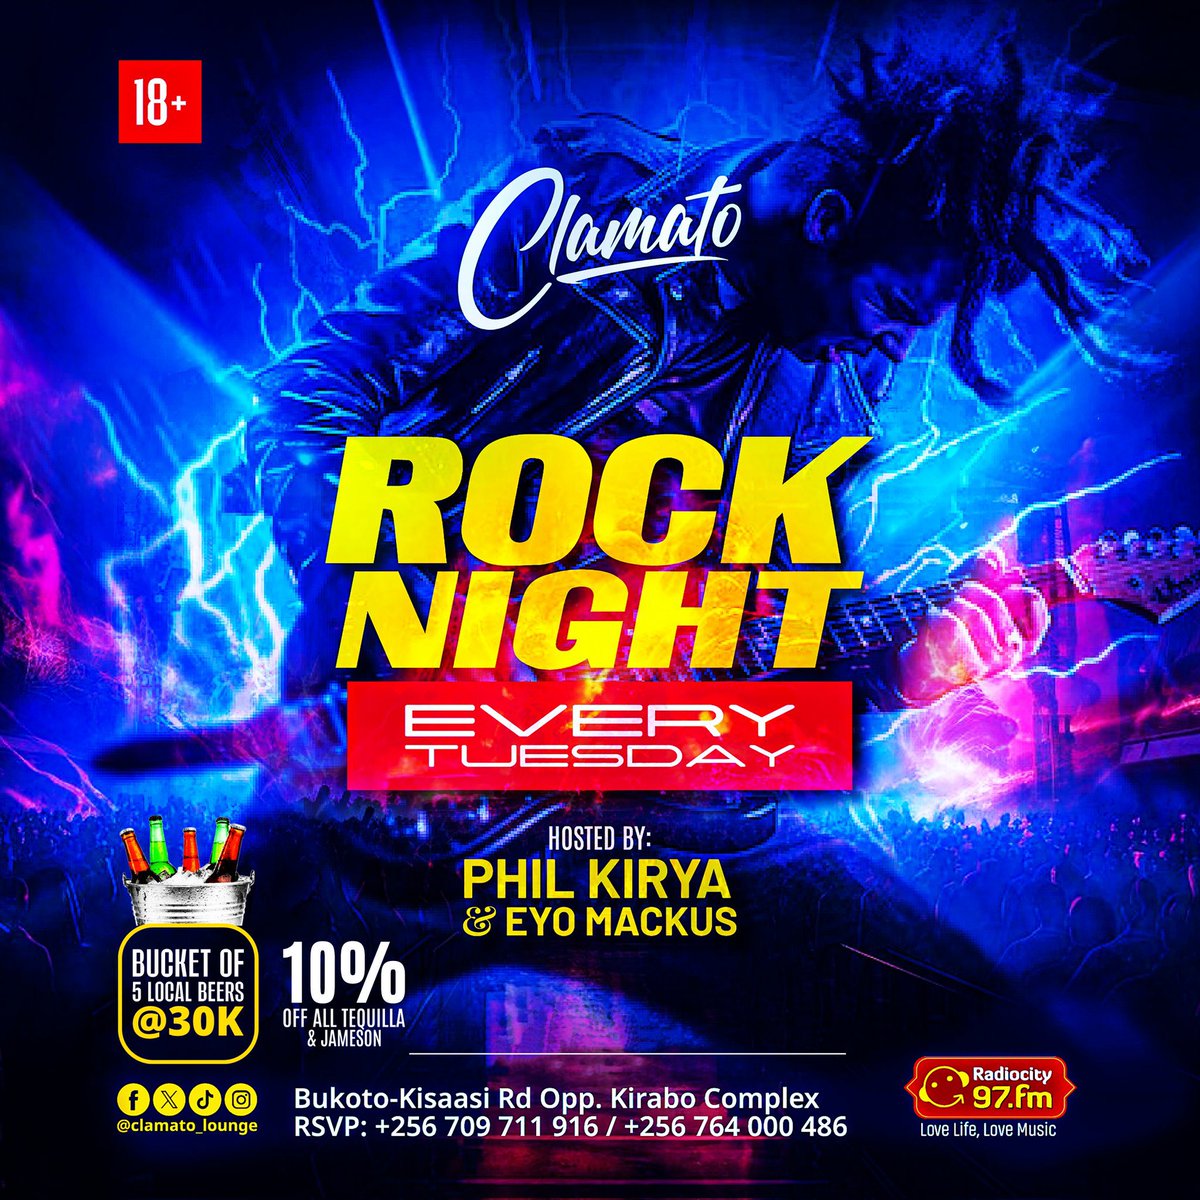 TUESDAY PLOT: 14/05 📌ROCK NIGHT 📍@clamato_lounge 🎙Hosted by: @PhilKirya & @EyoMackus Your Tuesday dose of RockNRoll is happening tonight, and to make things interesting, you can now buy a Bucket 🪣 of 5 local beers at 30K with a 10% discount off all Tequilla & Jameson.